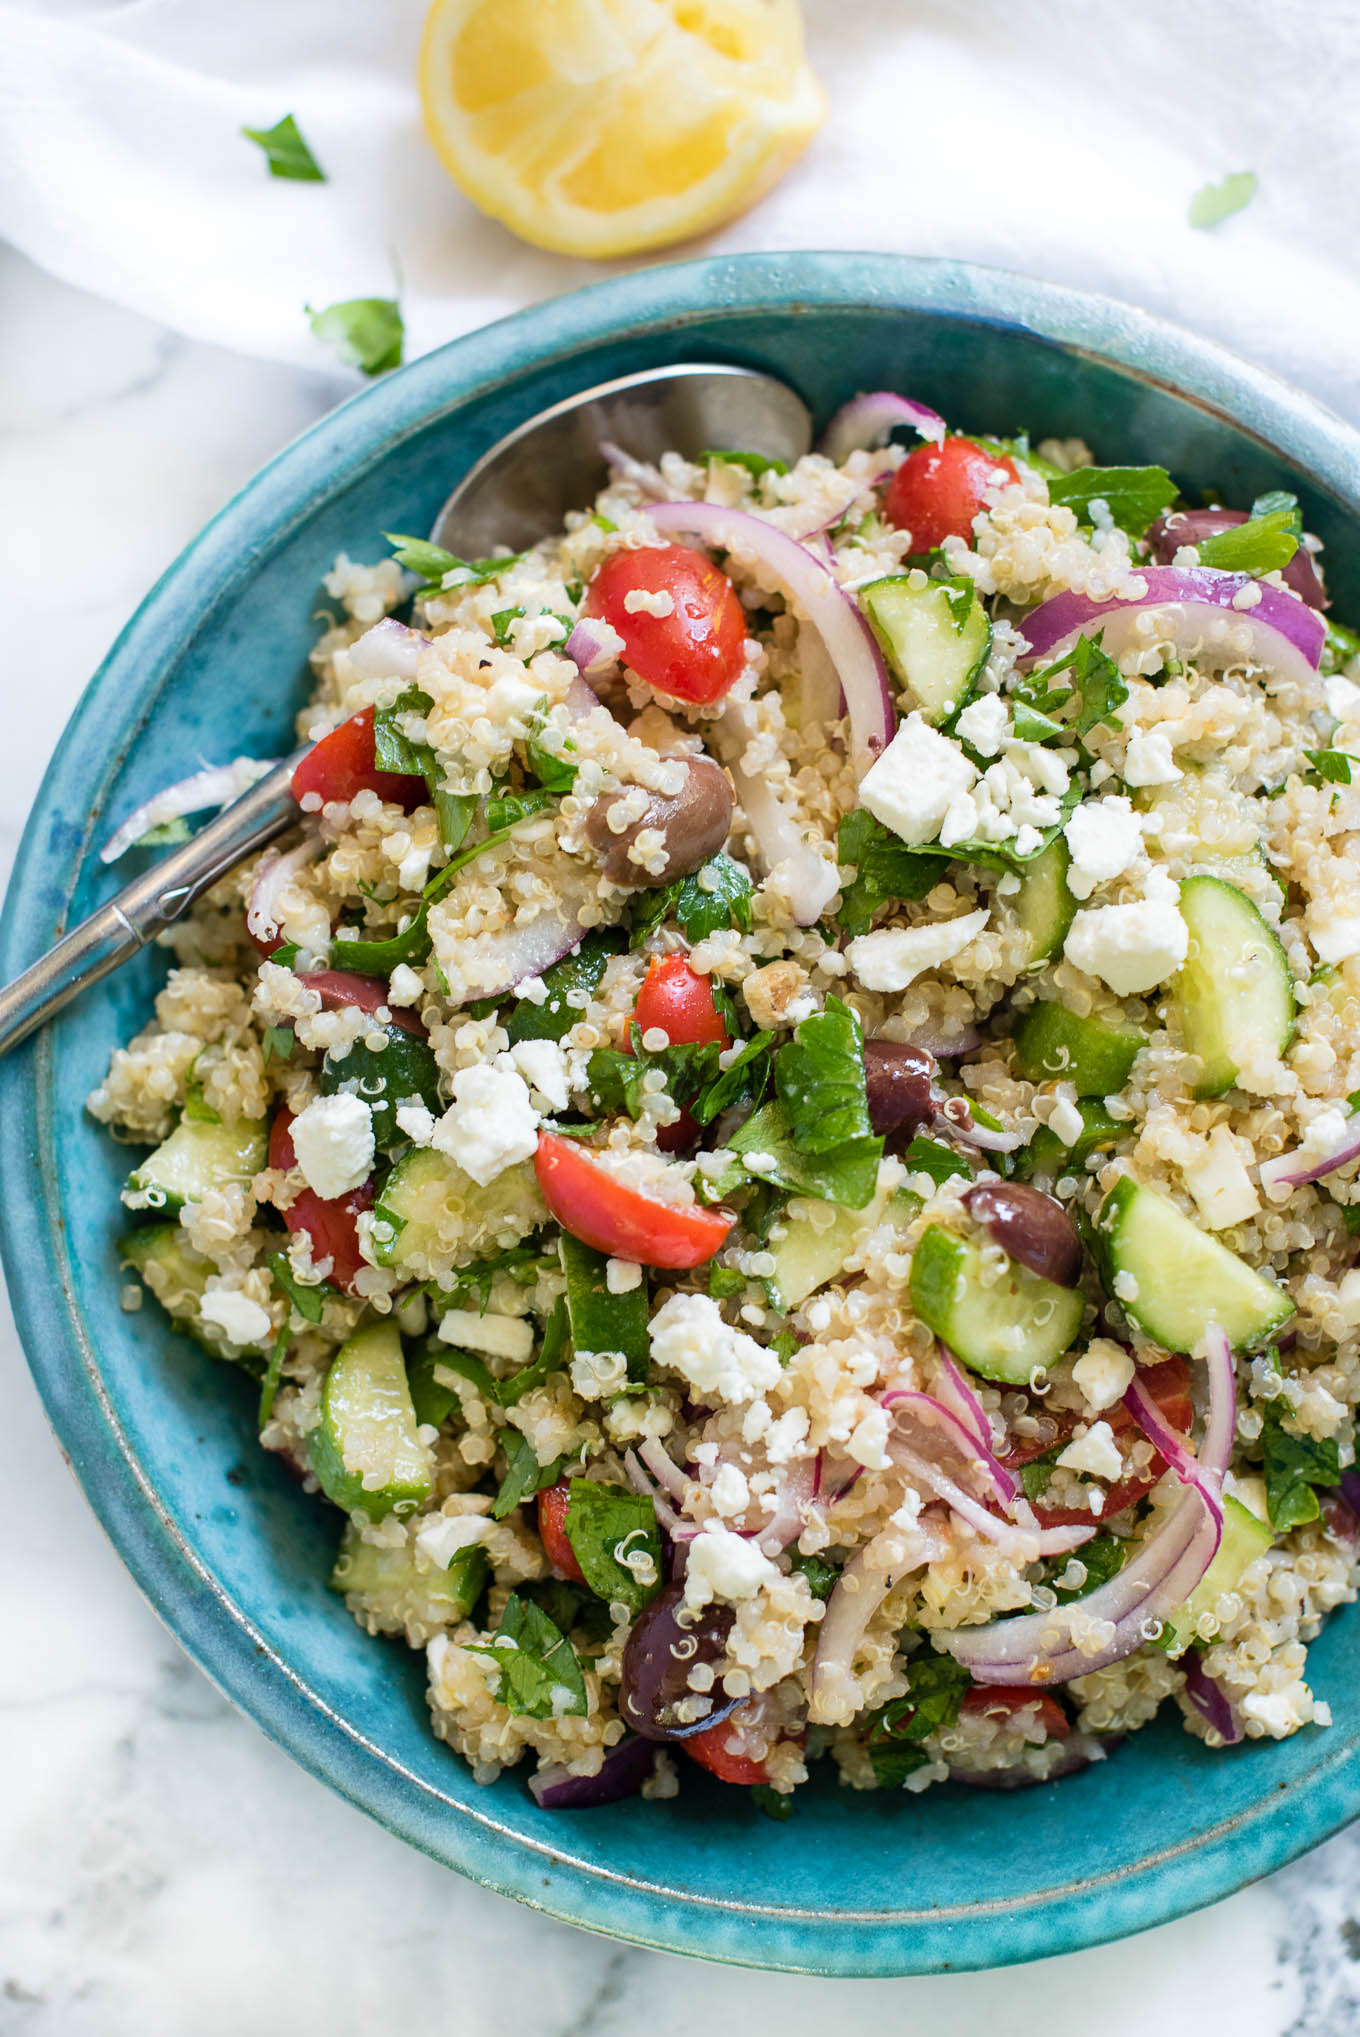 Greek Quinoa Salad is bursting with Mediterranean flavors and is a great make-ahead vegetarian and gluten free salad.